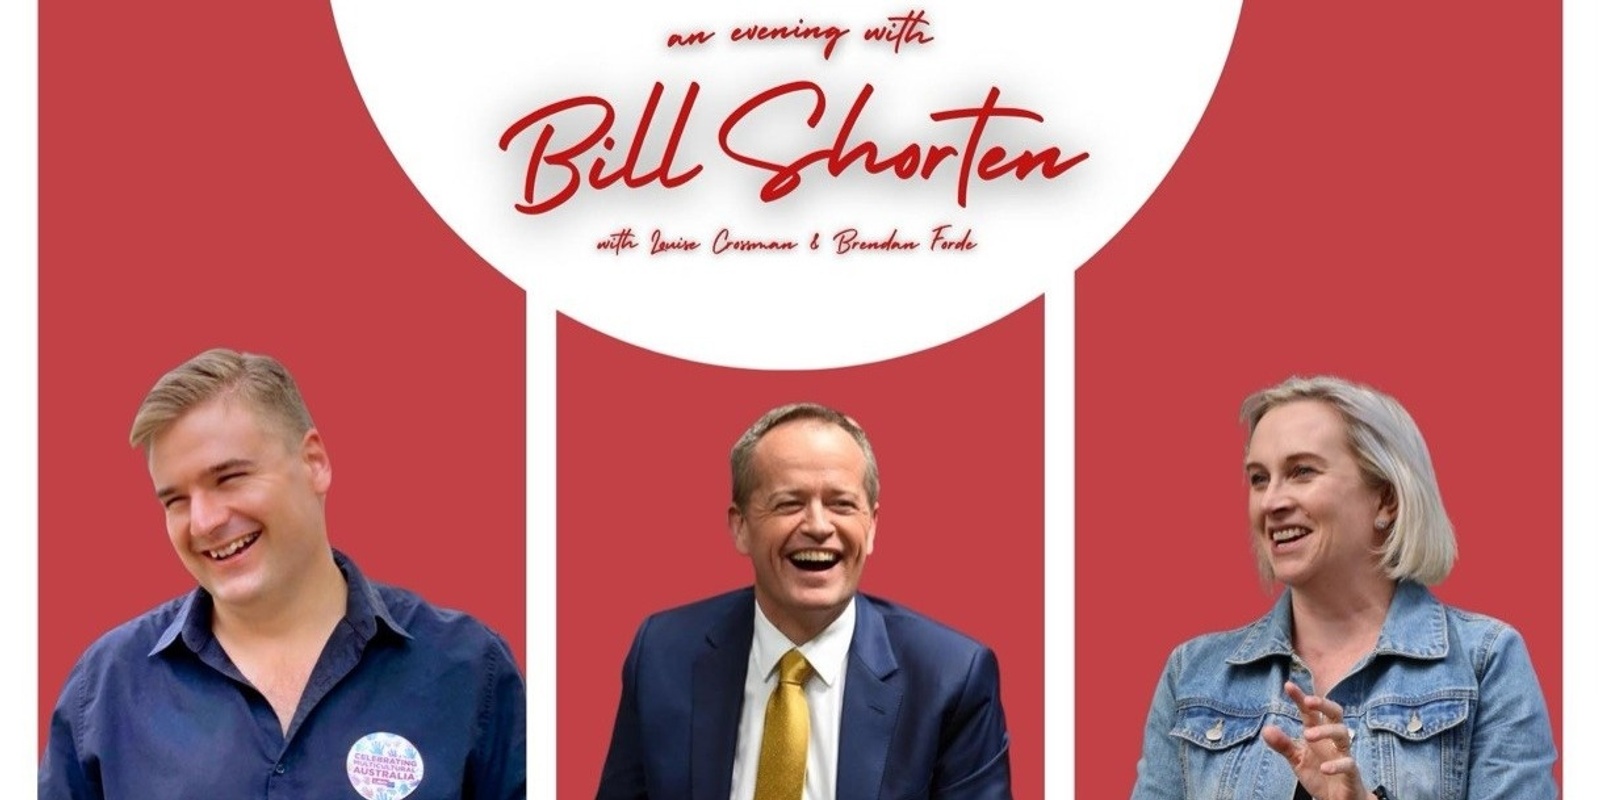 Banner image for An Evening with Bill Shorten 